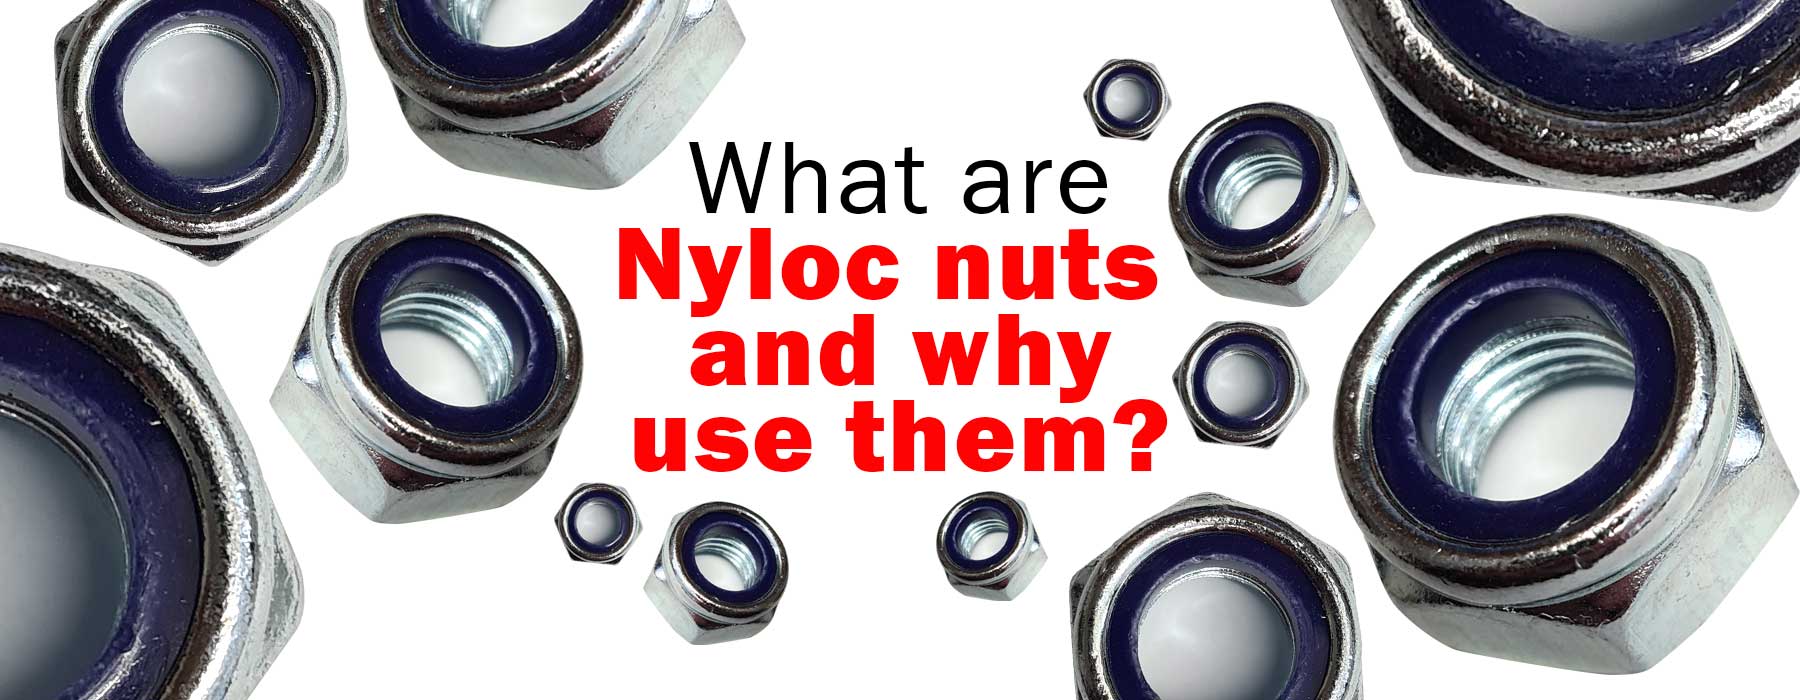 Blog post banner for the Nyloc nuts from Fusion Fixings